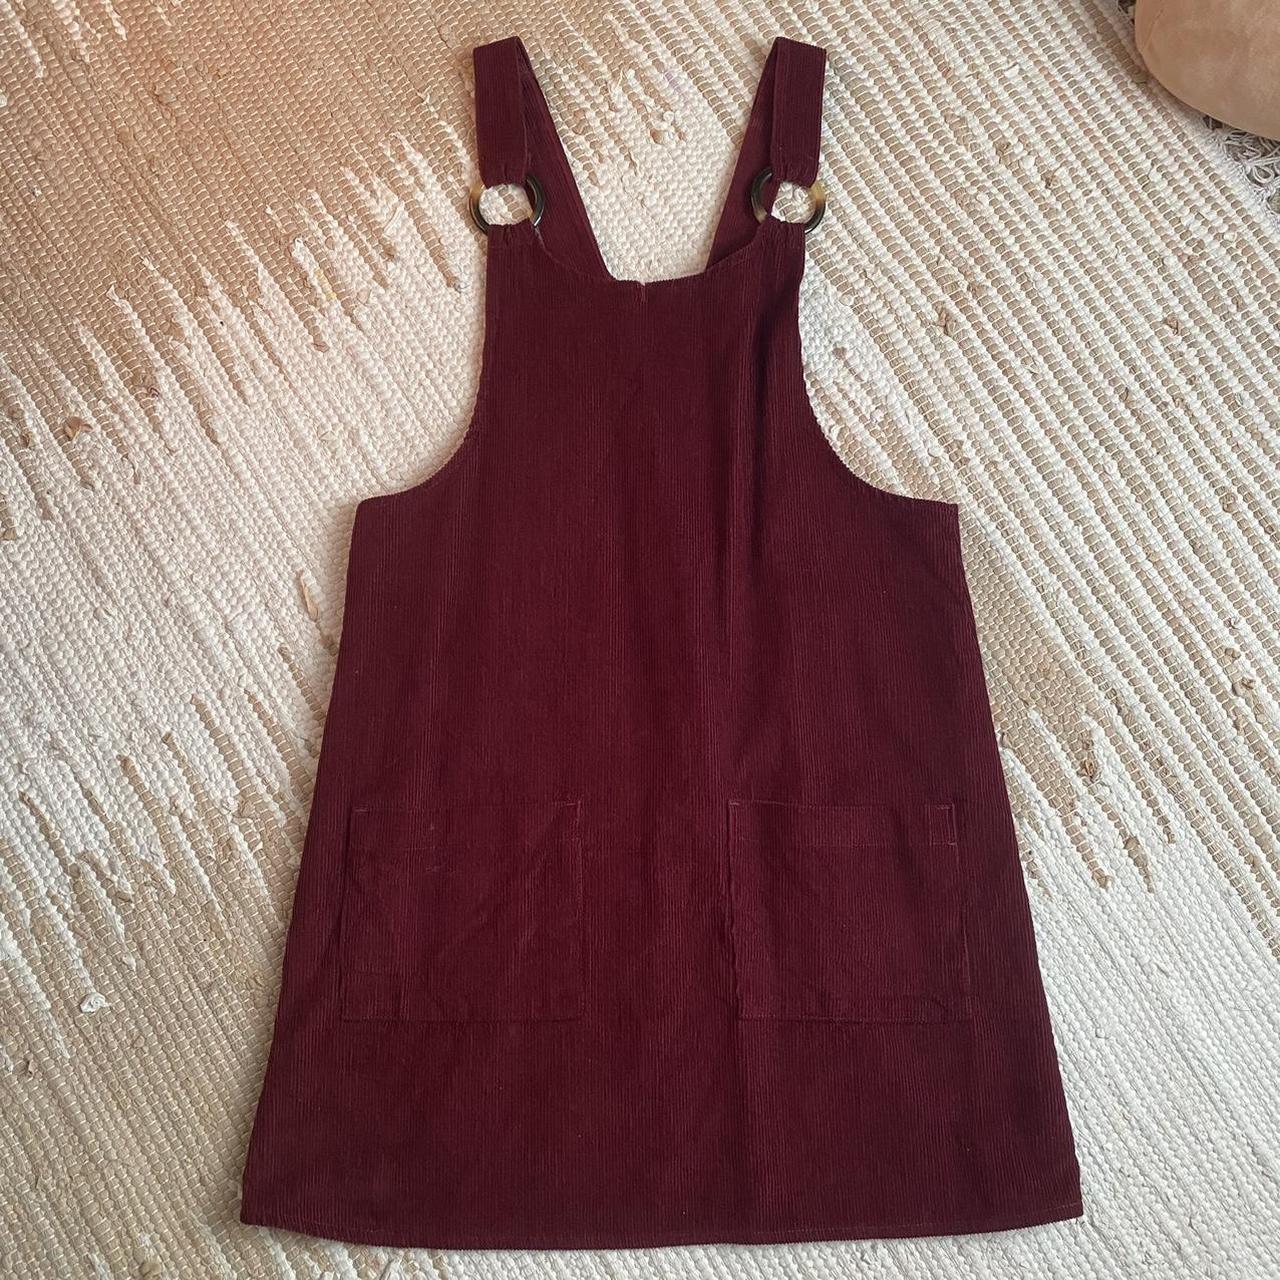 Full Circle Trends Women's Burgundy and Red Dress